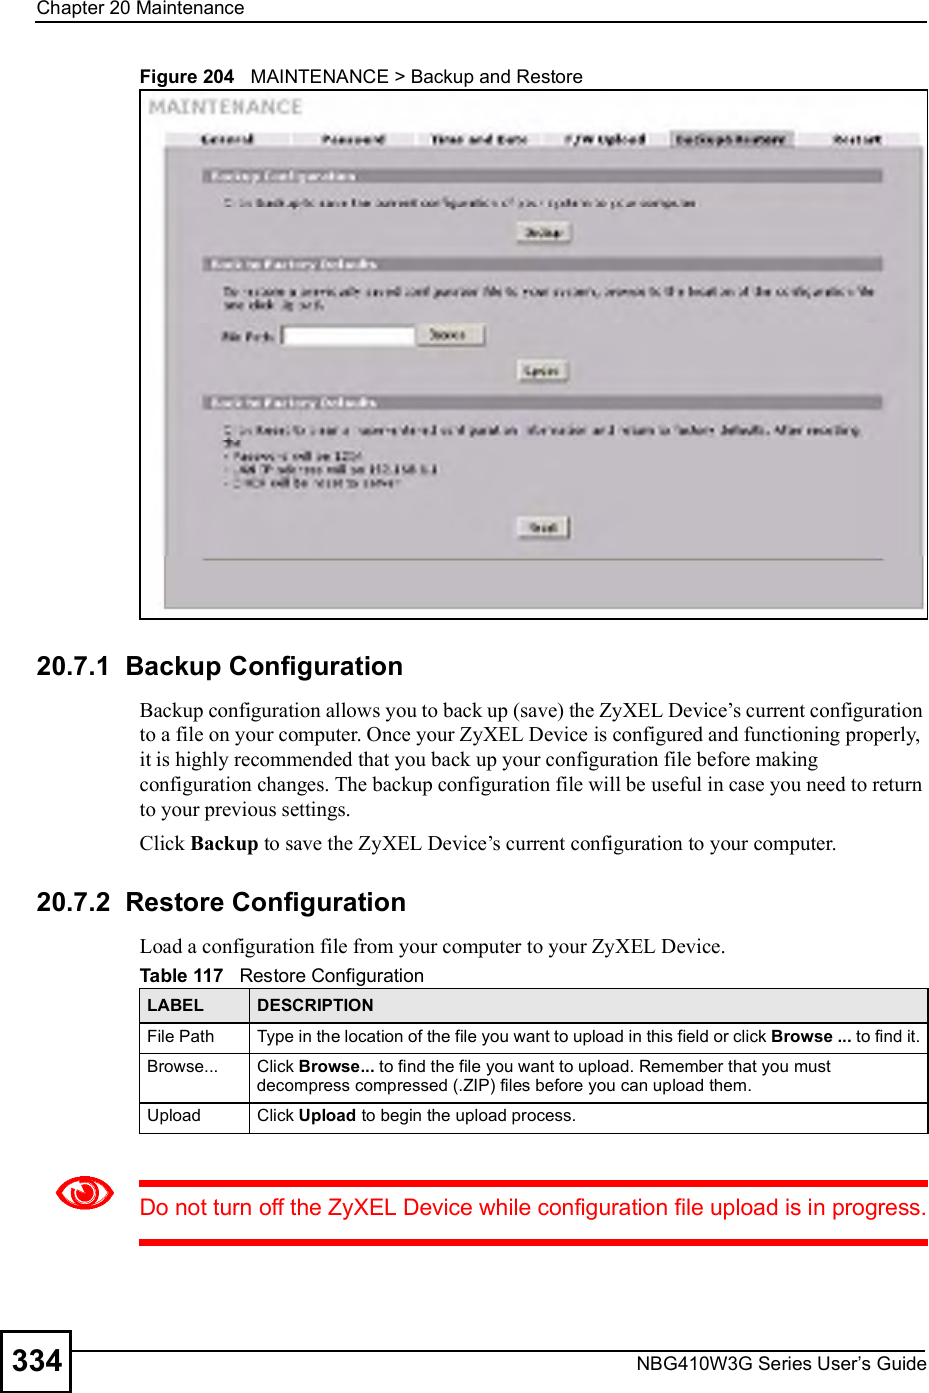 Chapter 20MaintenanceNBG410W3G Series User s Guide334Figure 204   MAINTENANCE &gt; Backup and Restore20.7.1  Backup Configuration Backup configuration allows you to back up (save) the ZyXEL Device!s current configuration to a file on your computer. Once your ZyXEL Device is configured and functioning properly, it is highly recommended that you back up your configuration file before making configuration changes. The backup configuration file will be useful in case you need to return to your previous settings. Click Backup to save the ZyXEL Device!s current configuration to your computer.20.7.2  Restore Configuration Load a configuration file from your computer to your ZyXEL Device.Do not turn off the ZyXEL Device while configuration file upload is in progress.Table 117   Restore ConfigurationLABEL DESCRIPTIONFile Path  Type in the location of the file you want to upload in this field or click Browse ... to find it.Browse...  Click Browse... to find the file you want to upload. Remember that you must decompress compressed (.ZIP) files before you can upload them. Upload  Click Upload to begin the upload process.